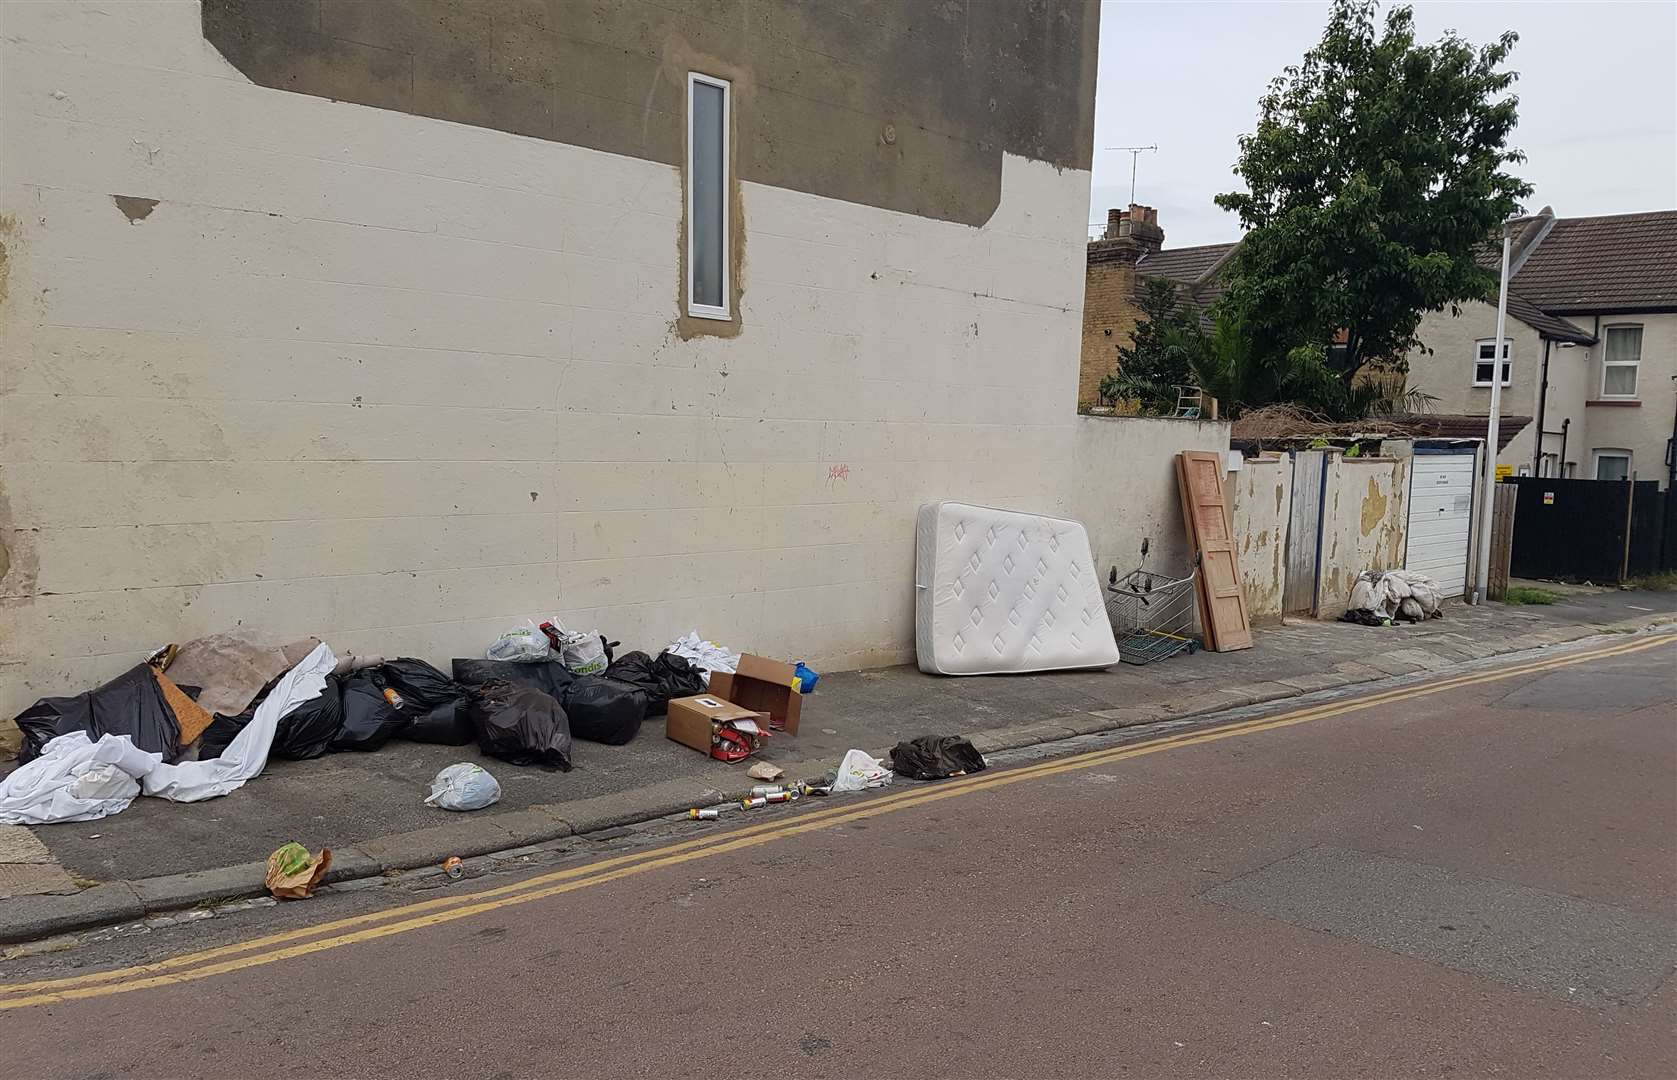 The street is a hot spot for fly tipping